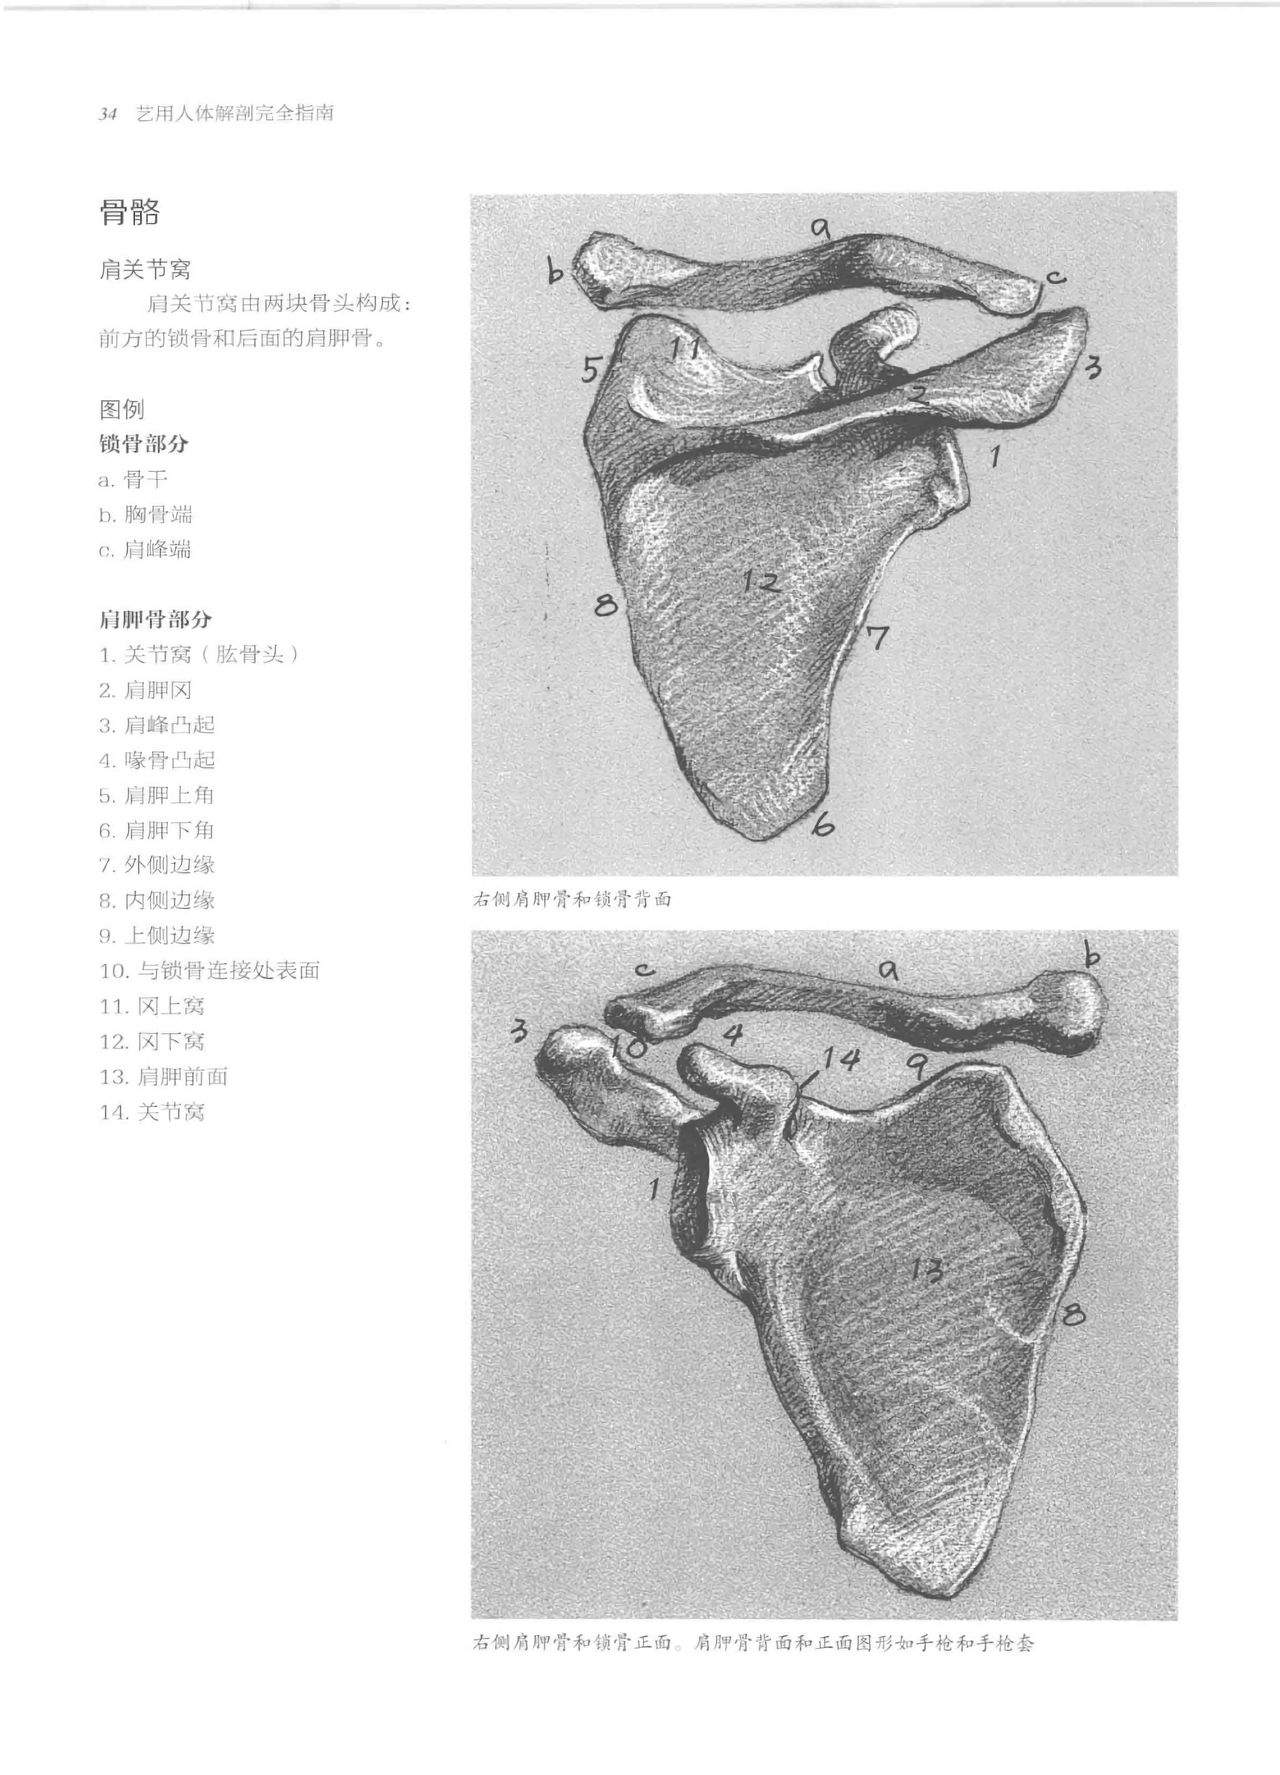 Anatomy-A Complete Guide for Artists - Joseph Sheppard [Chinese] 34